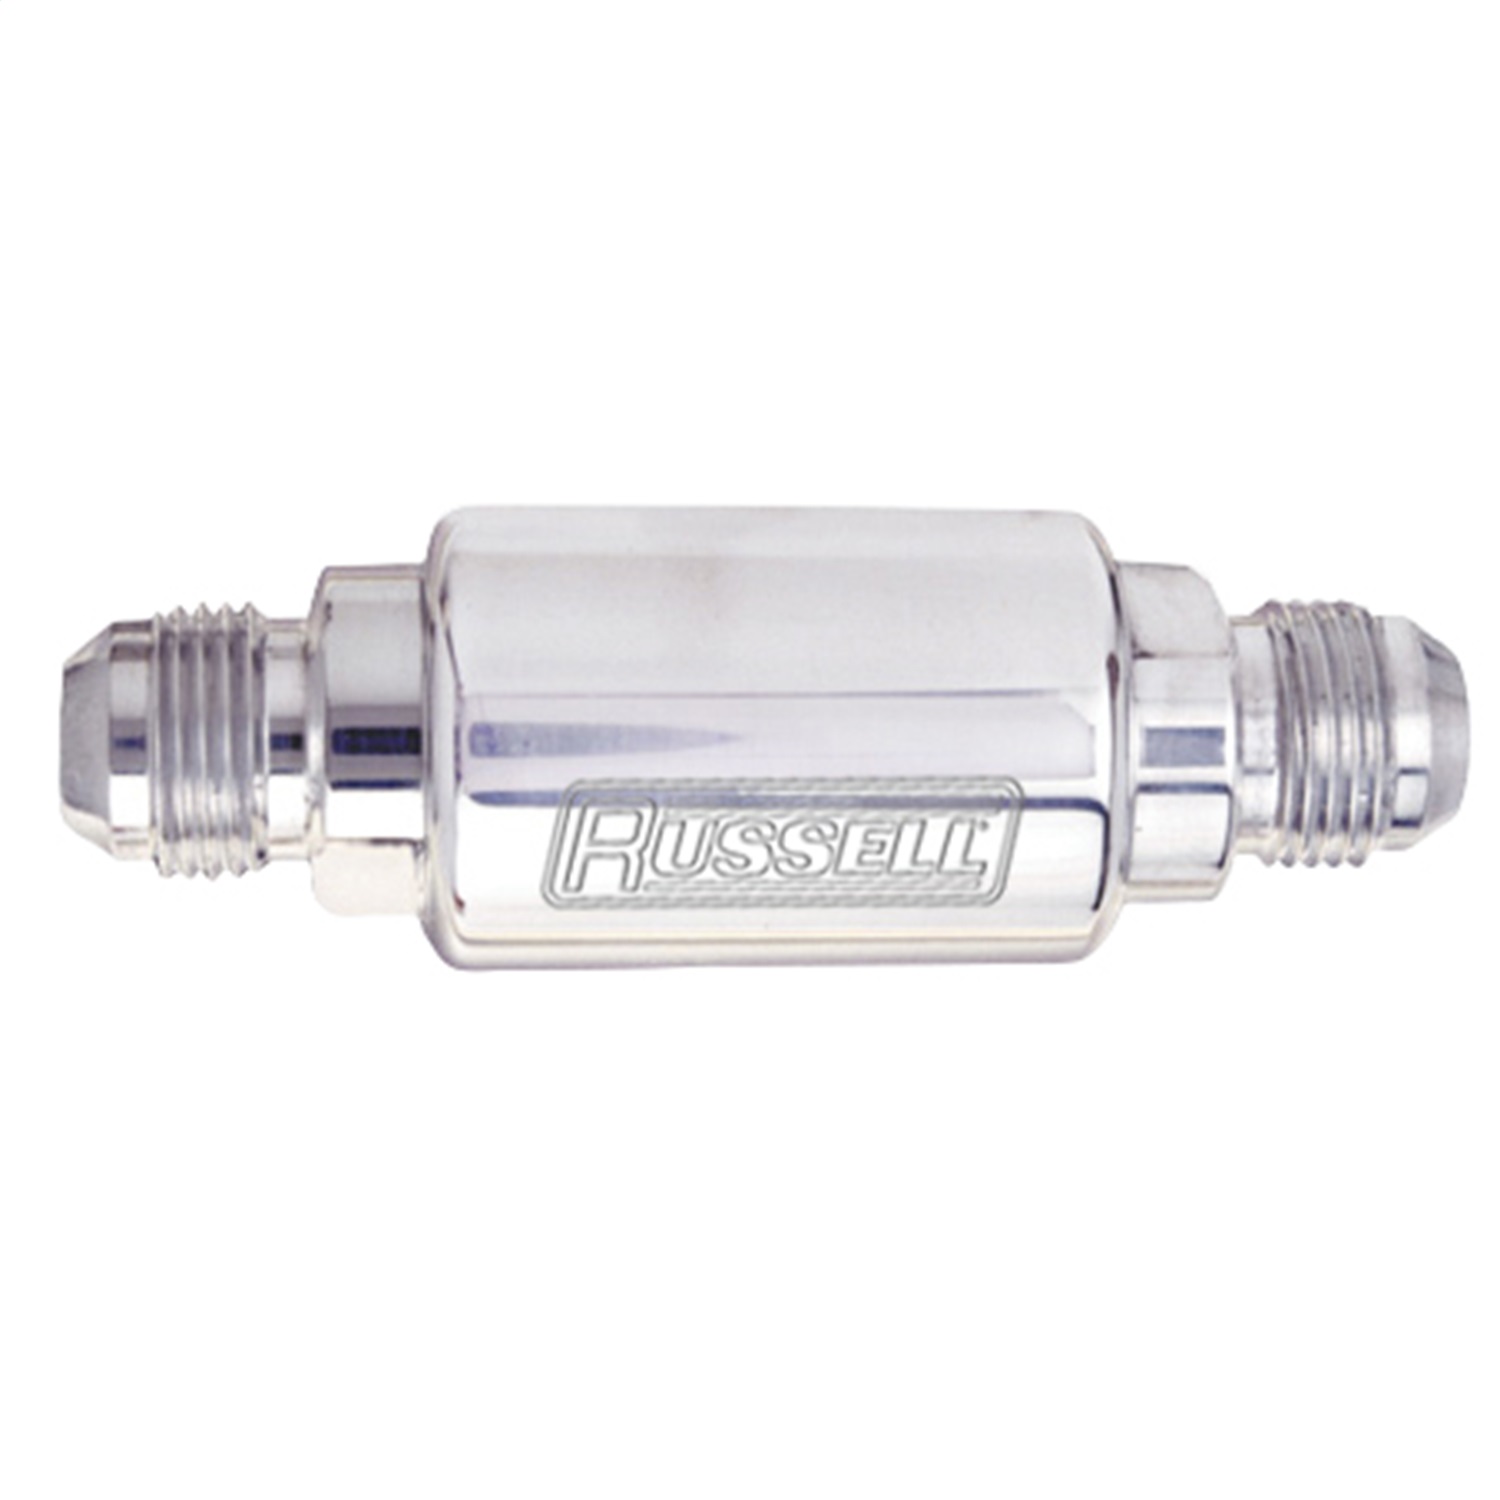 Competition Fuel Filter -08 AN Male Inlet / 3/8" NPT Male Outlet